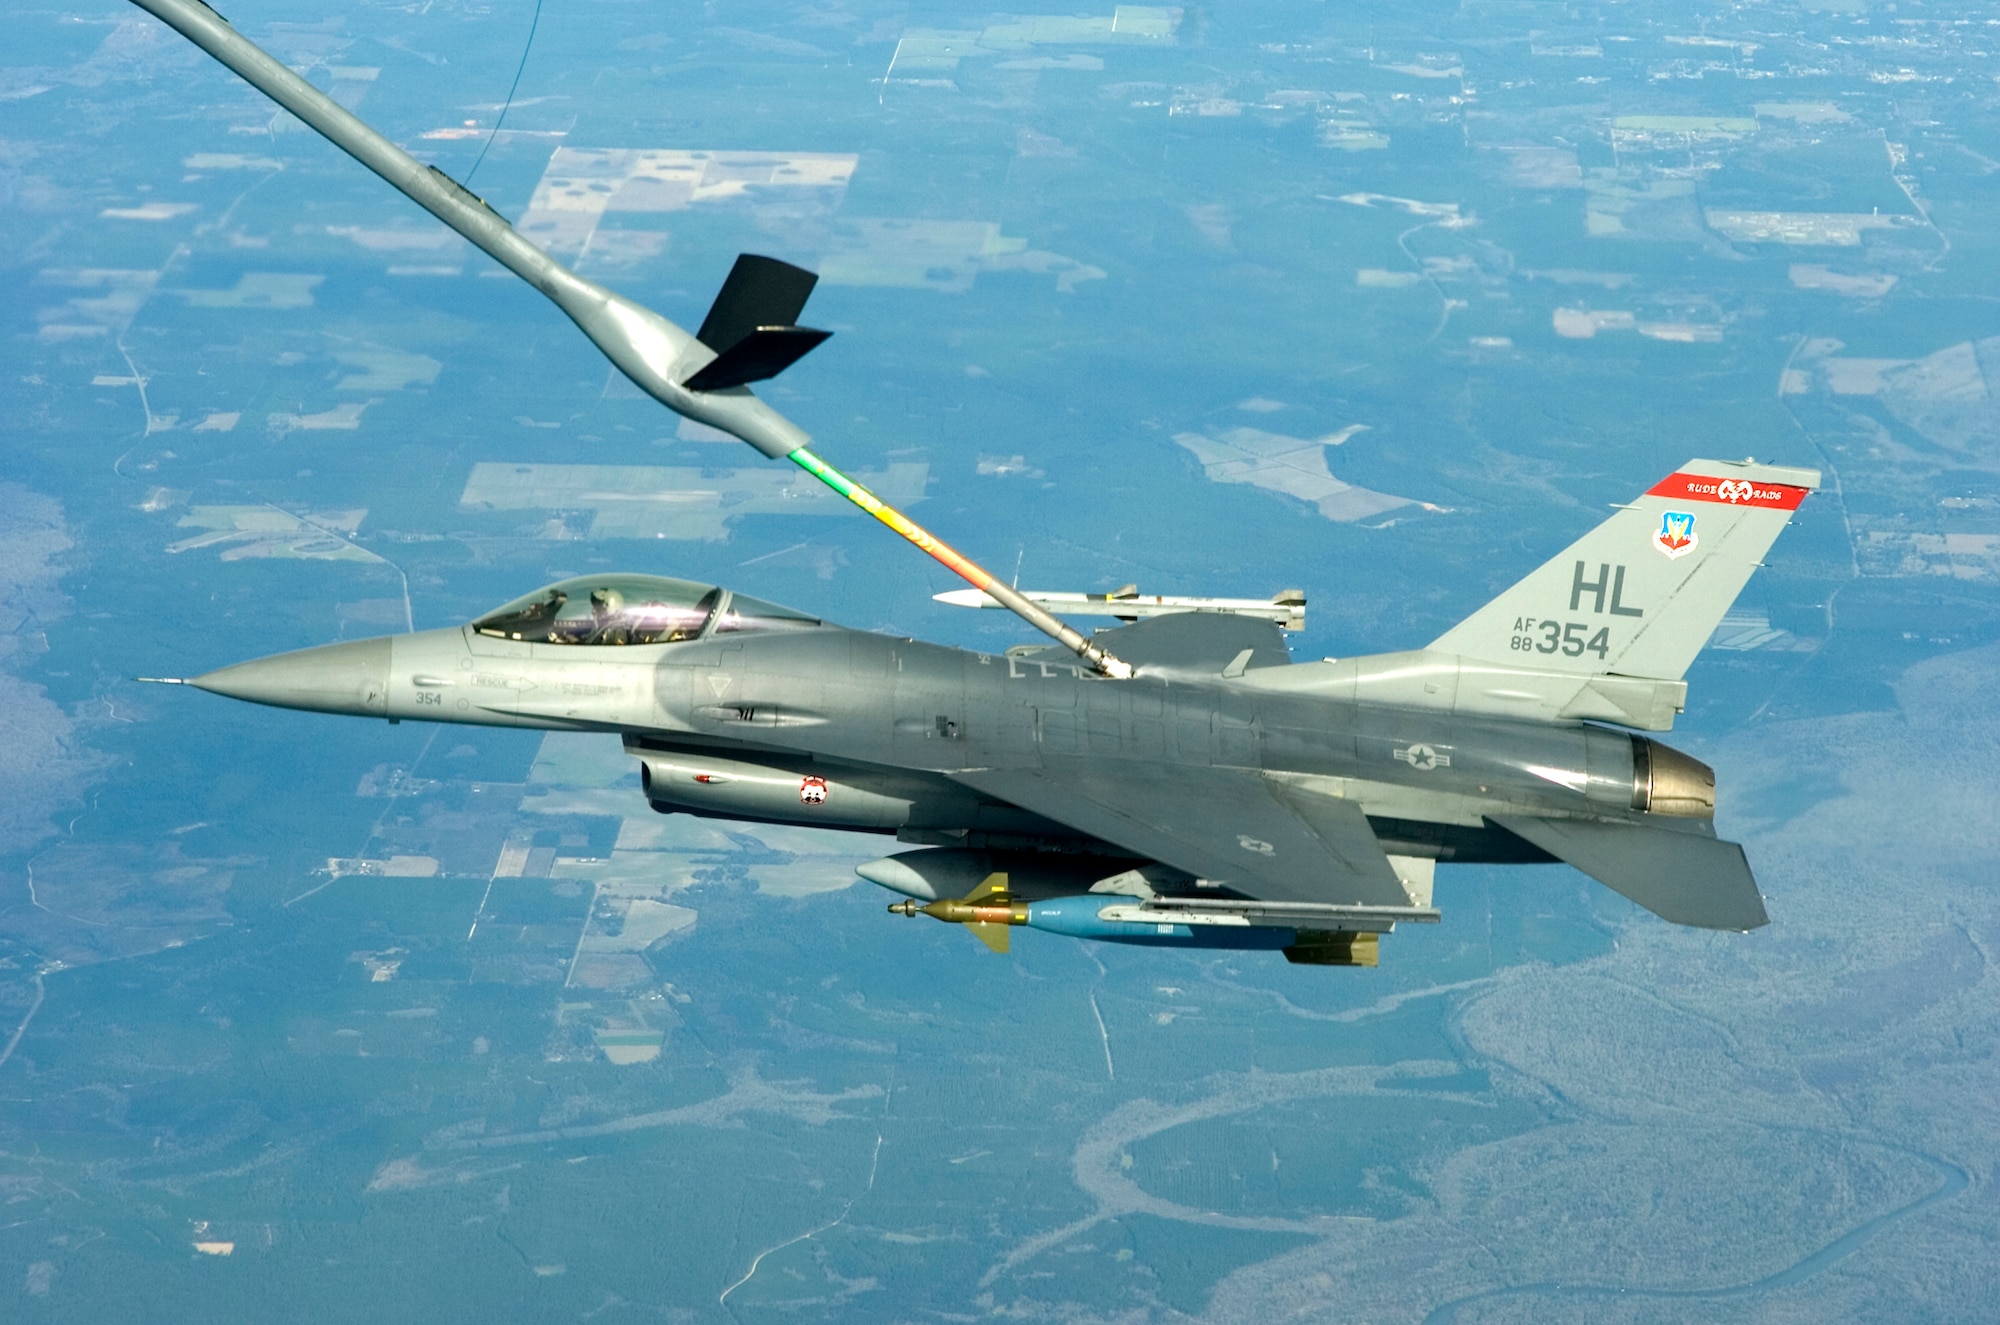 A F-16 Fighting Falcon from the 34th Fighter Squadron at Hill Air Force Base, Utah, connects with a KC-135 Stratotanker from MacDill Air Force Base, Fla., for a quick gas-n-go during a Weapons System Evaluation Program mission, Jan 14.  The 34 FS participated in the first-ever combined WSEP Jan. 12-15.  This WSEP combined the live air-to-air missile firing of Combat Archer and the air-to-ground bomb drops of Combat Hammer into one continuous mission.  This major undertaking brought together the WSEP evaluators from the 83rd Fighter Weapons Squadron, located at Tyndall Air Force Base, Fla., and the 86th Fighter Weapons Squadron at Eglin.  This new combined mission began with the aircraft load and launch from Tyndall.  Then the pilot performed a live missile firing over the Gulf of Mexico.  After the missile launch, the pilot connected with a KC-135 Stratotanker from MacDill Air Force Base, Fla., for refueling.  Then, the pilot flew over the Eglin range to perform a live bomb drop.  (U.S. Air Force photo\Tech Sgt. Jason Wilkerson.)